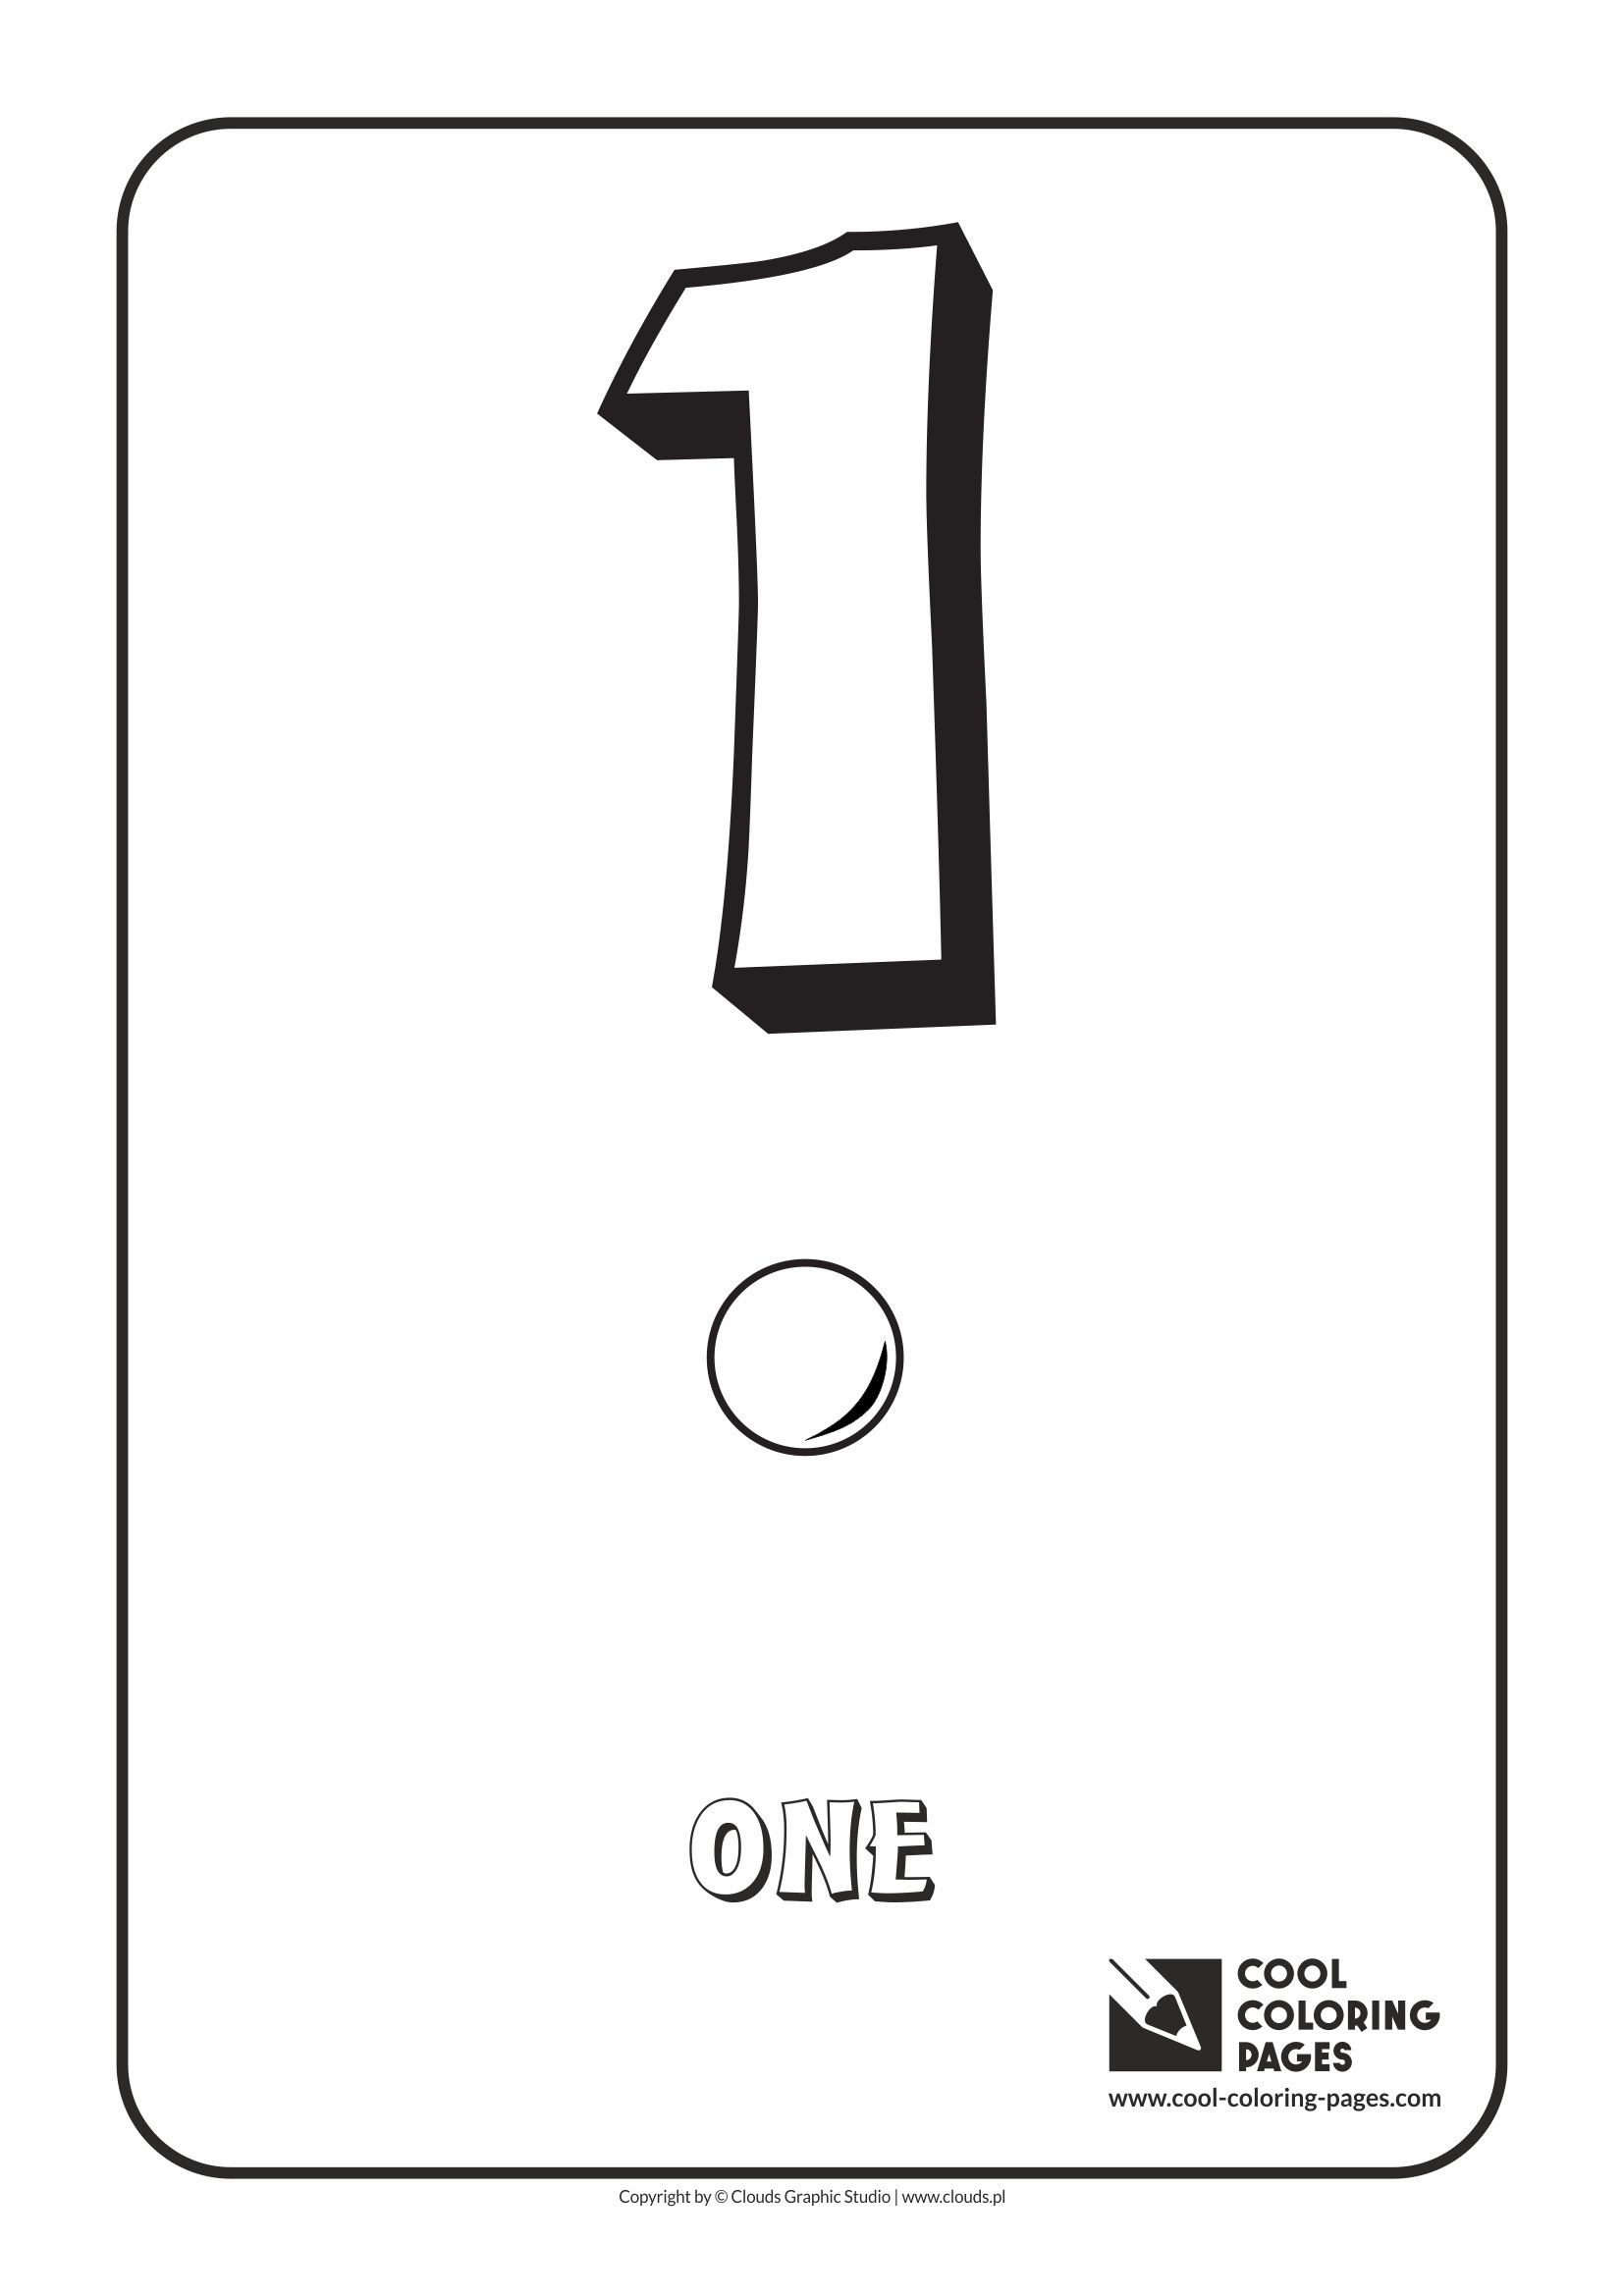 Cool Coloring Pages - Digits / Digit 1 / Coloring page with digit 1